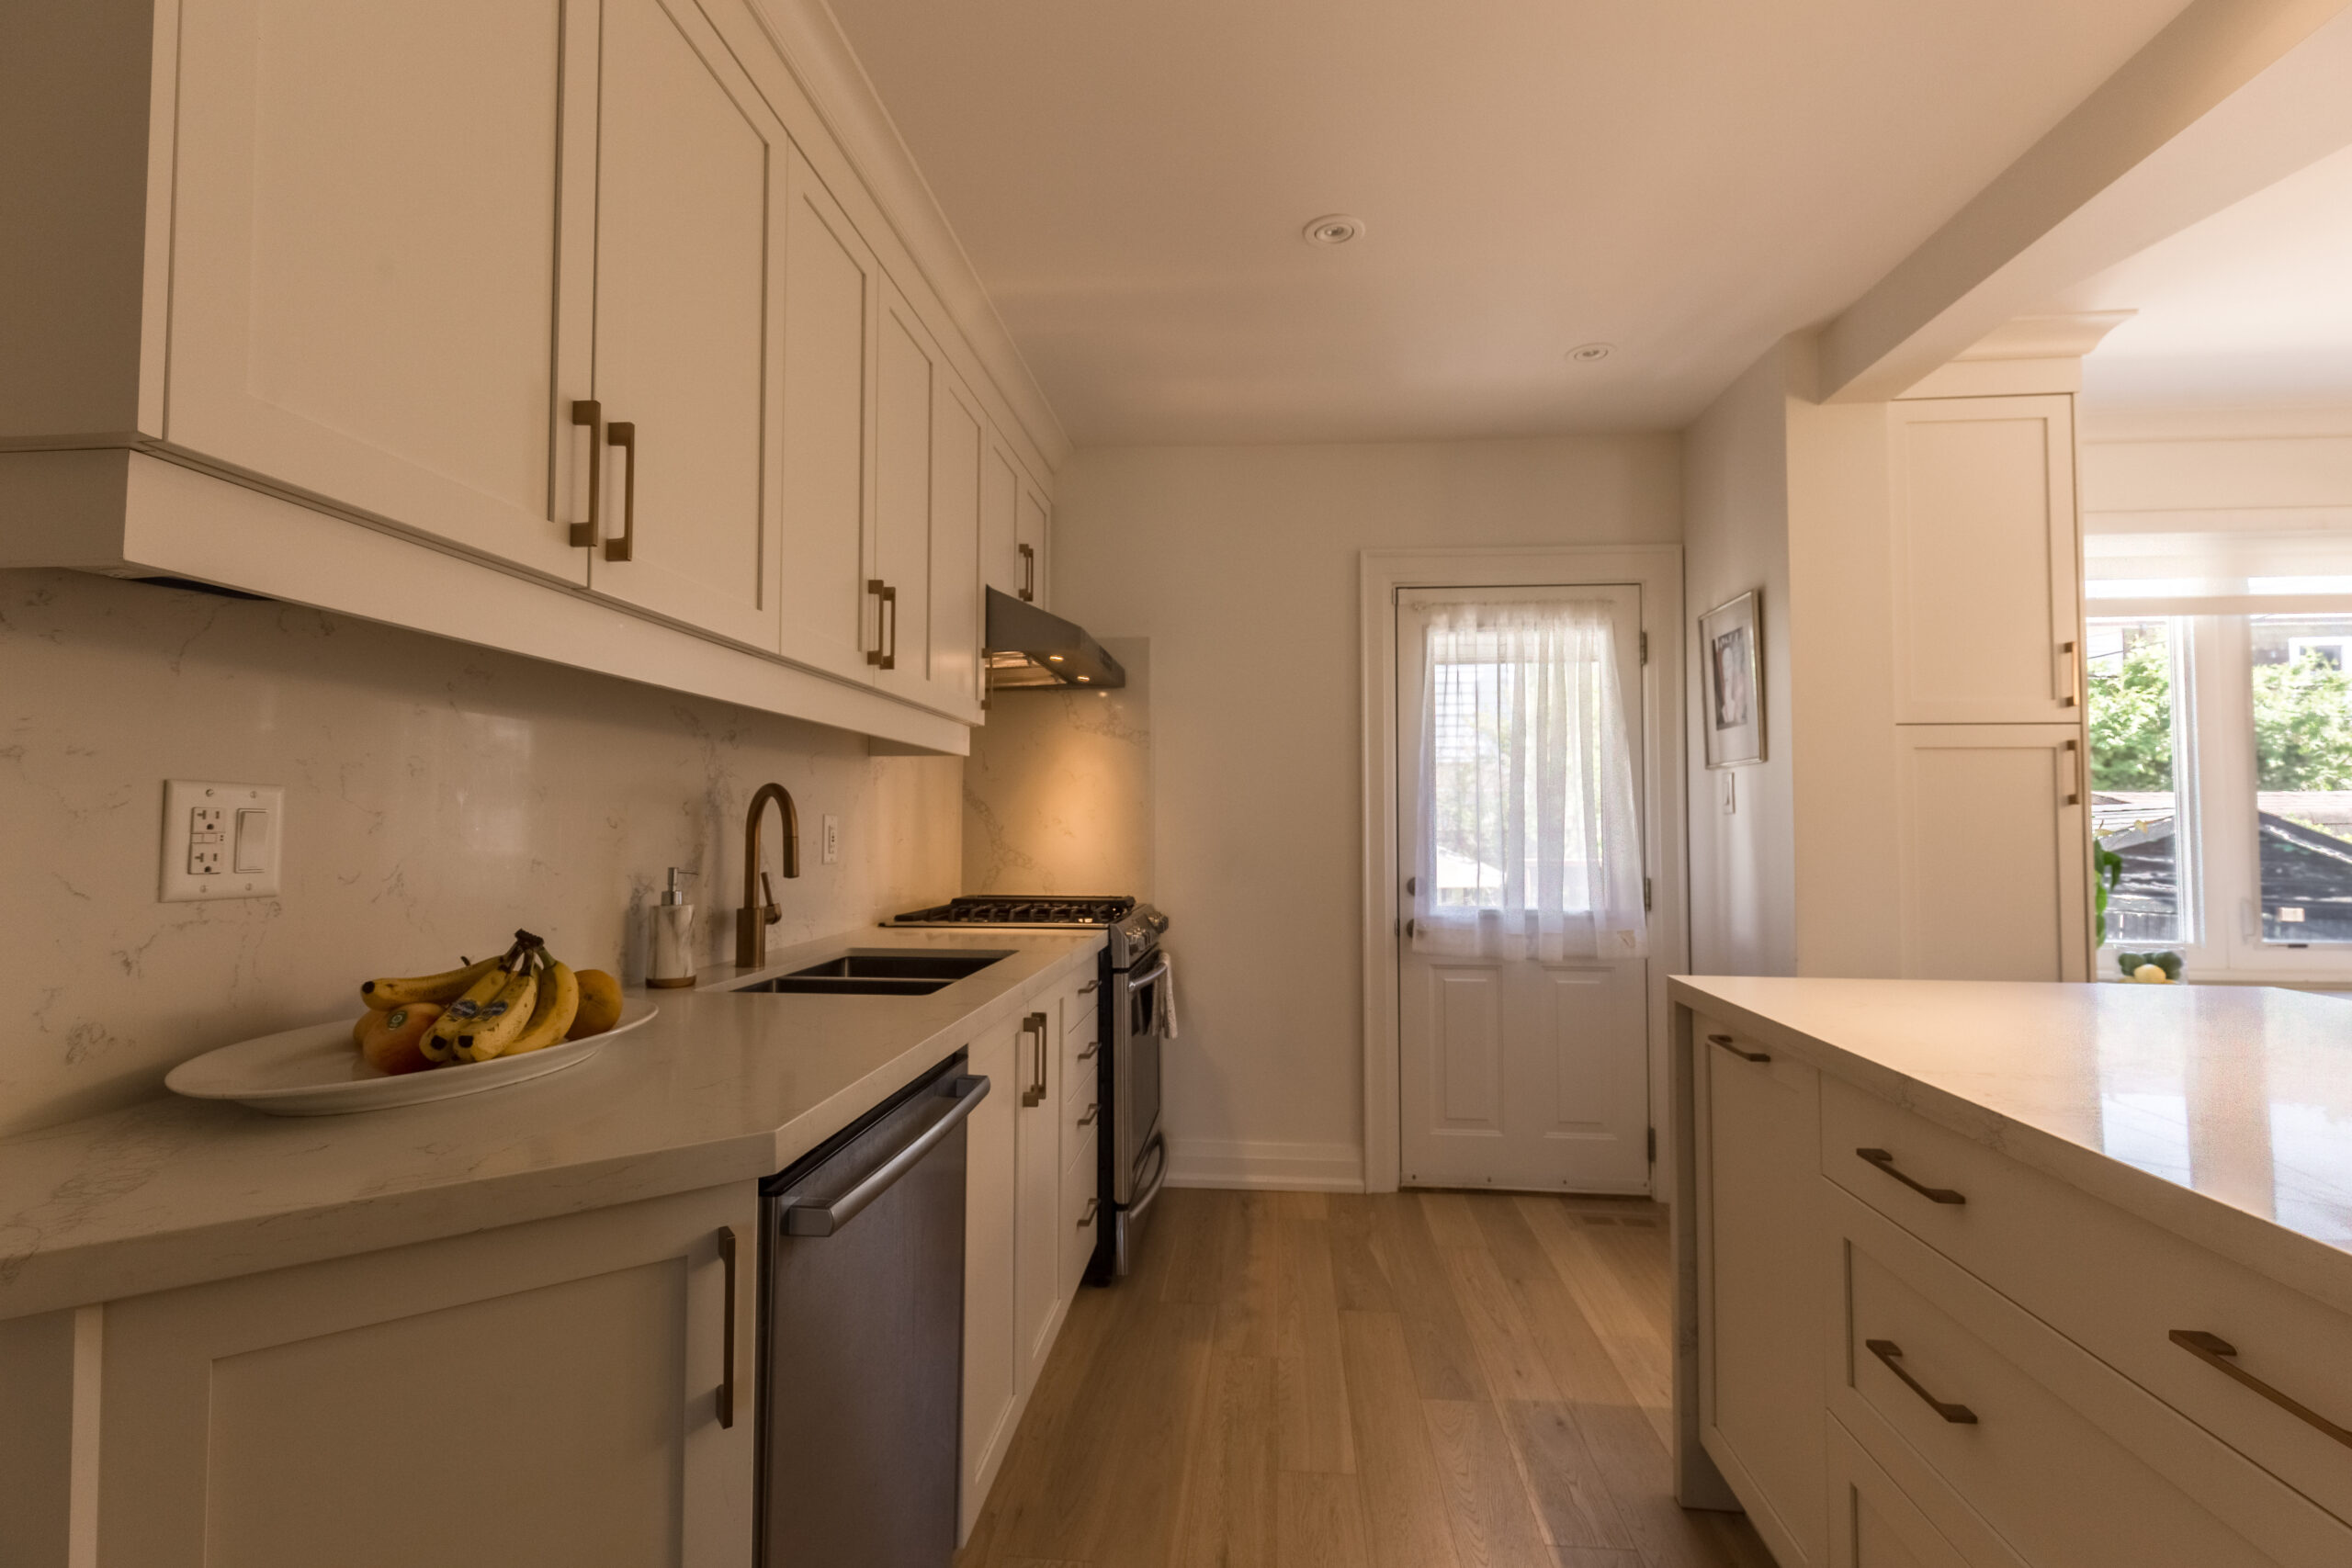 2021 - New kitchen & dining room renovation on Aldwych